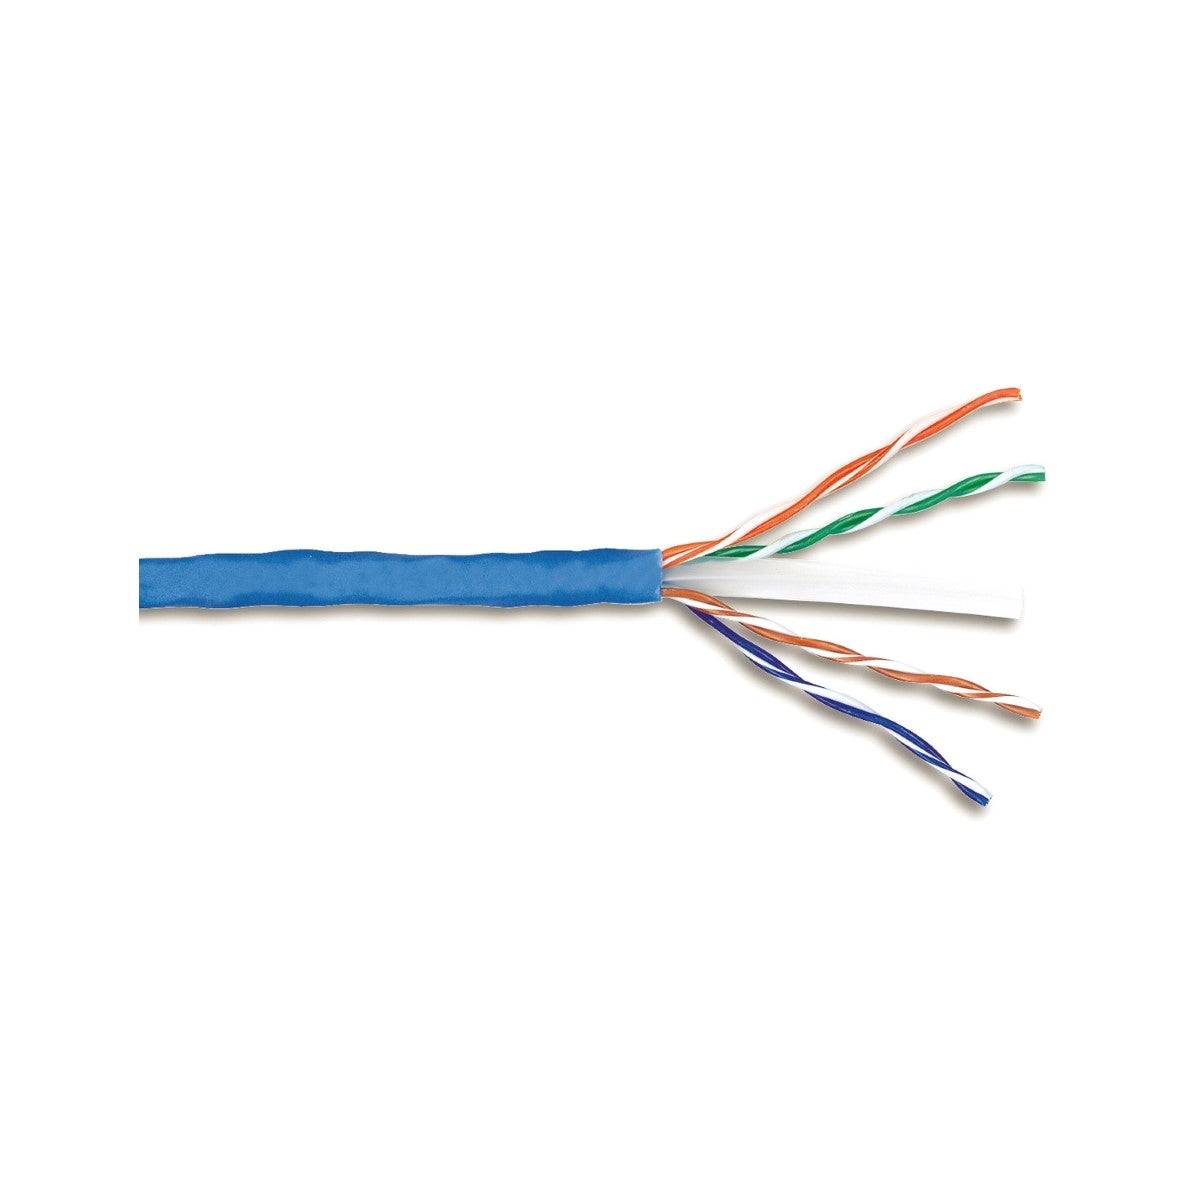 Actassi - cable - category 6 - UTP - 23 AWG - solid copper - blue - CM